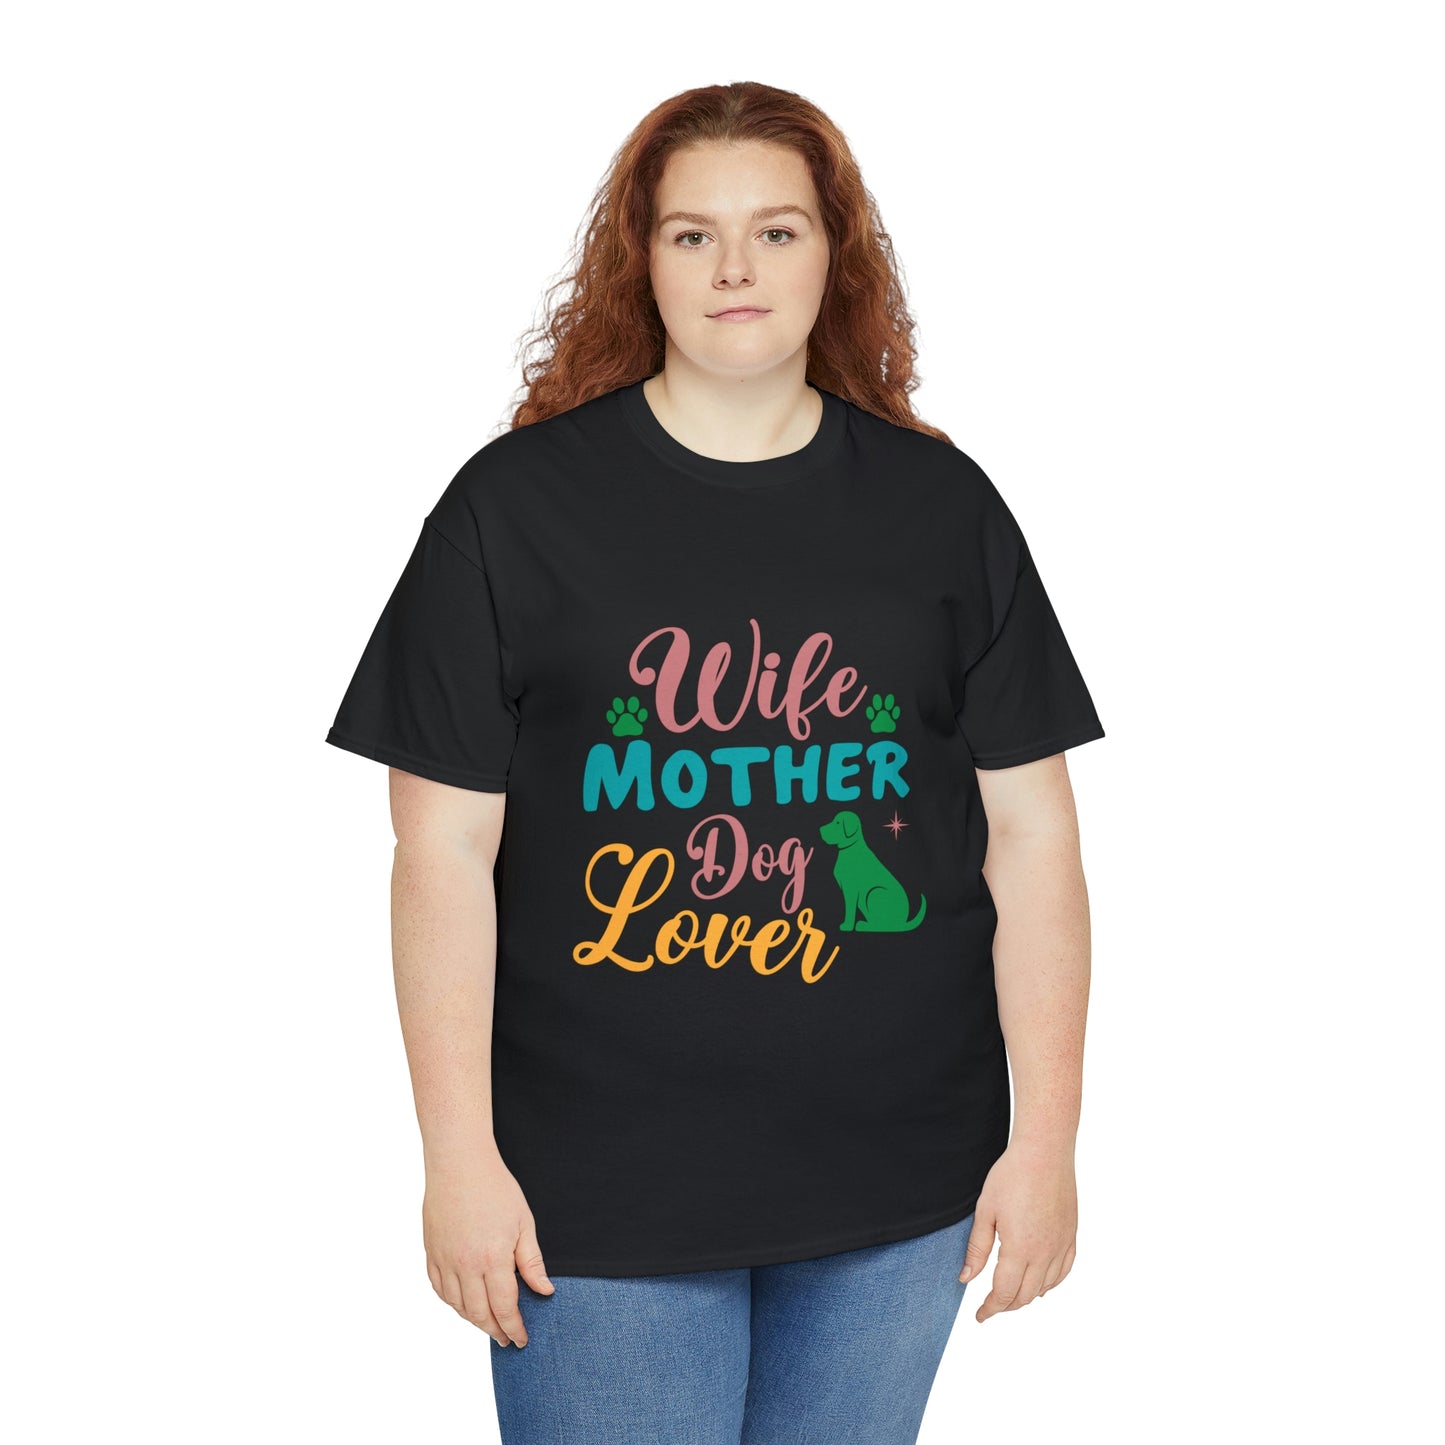 Wife Mother Dog Lover Tee